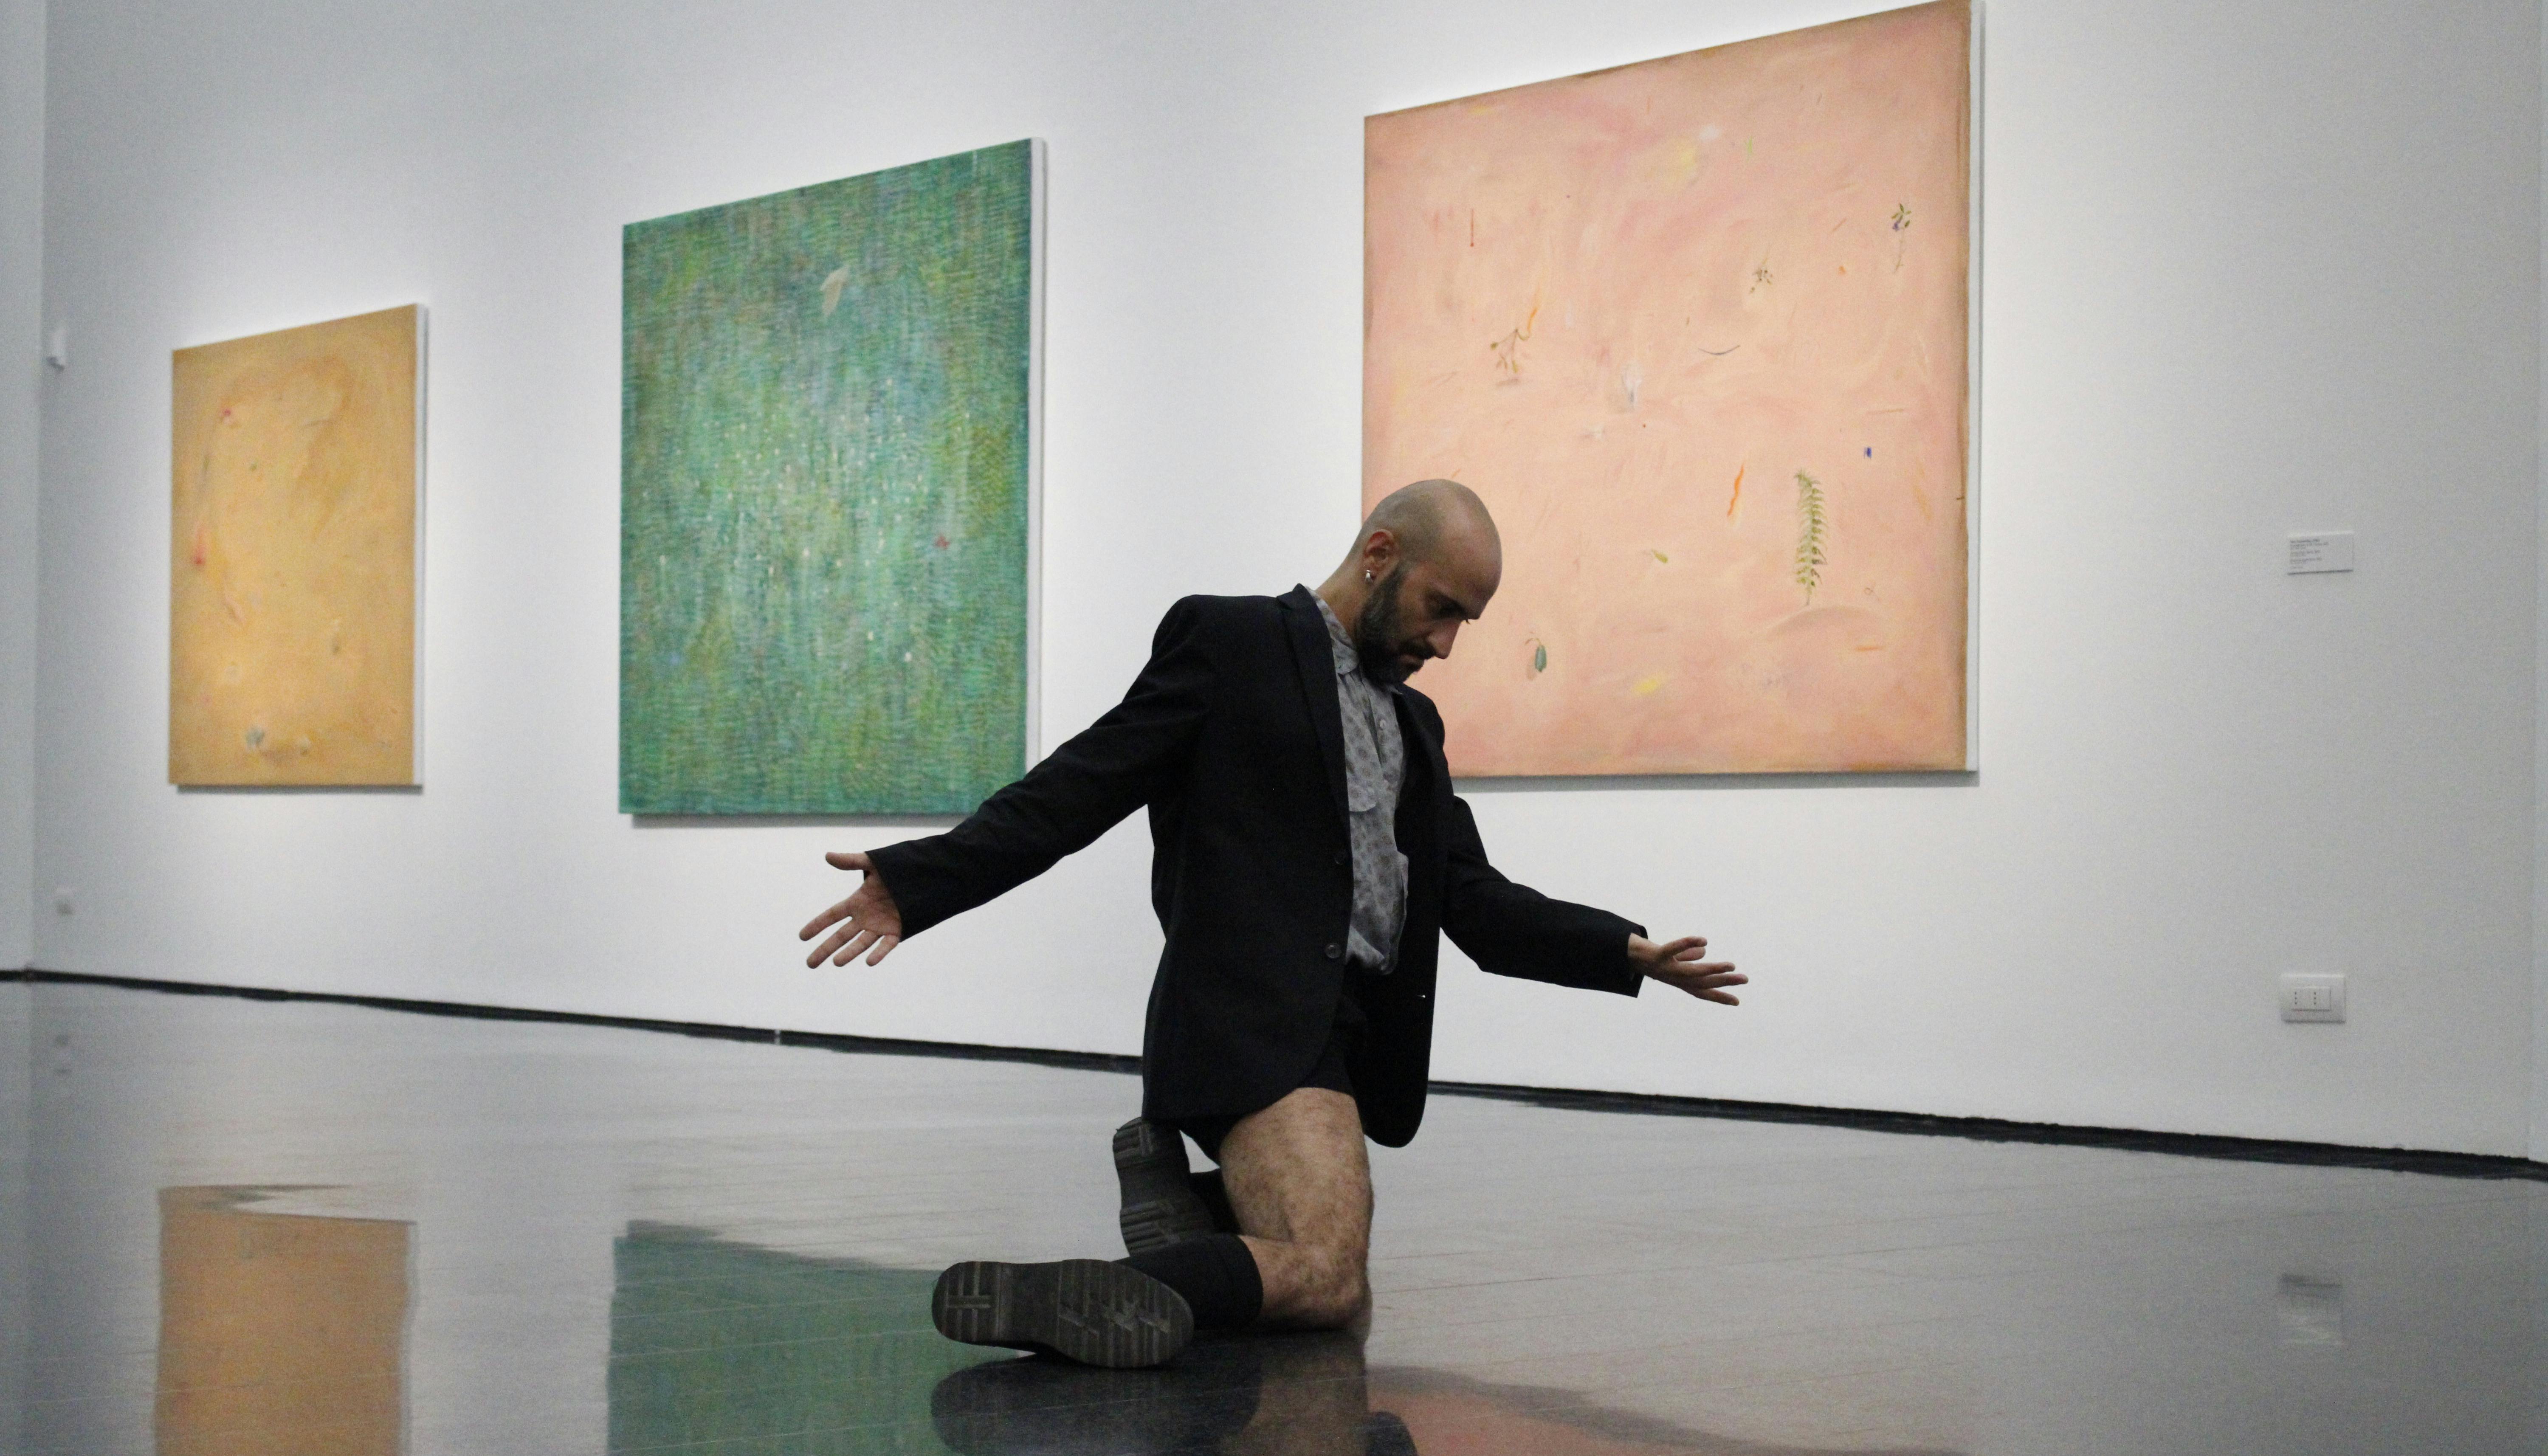 Daniele Ninarello is kneeled, his arms slightly open and his head reclined to his sternum. Behind him, on the wall, three abstract paintings of different colors.